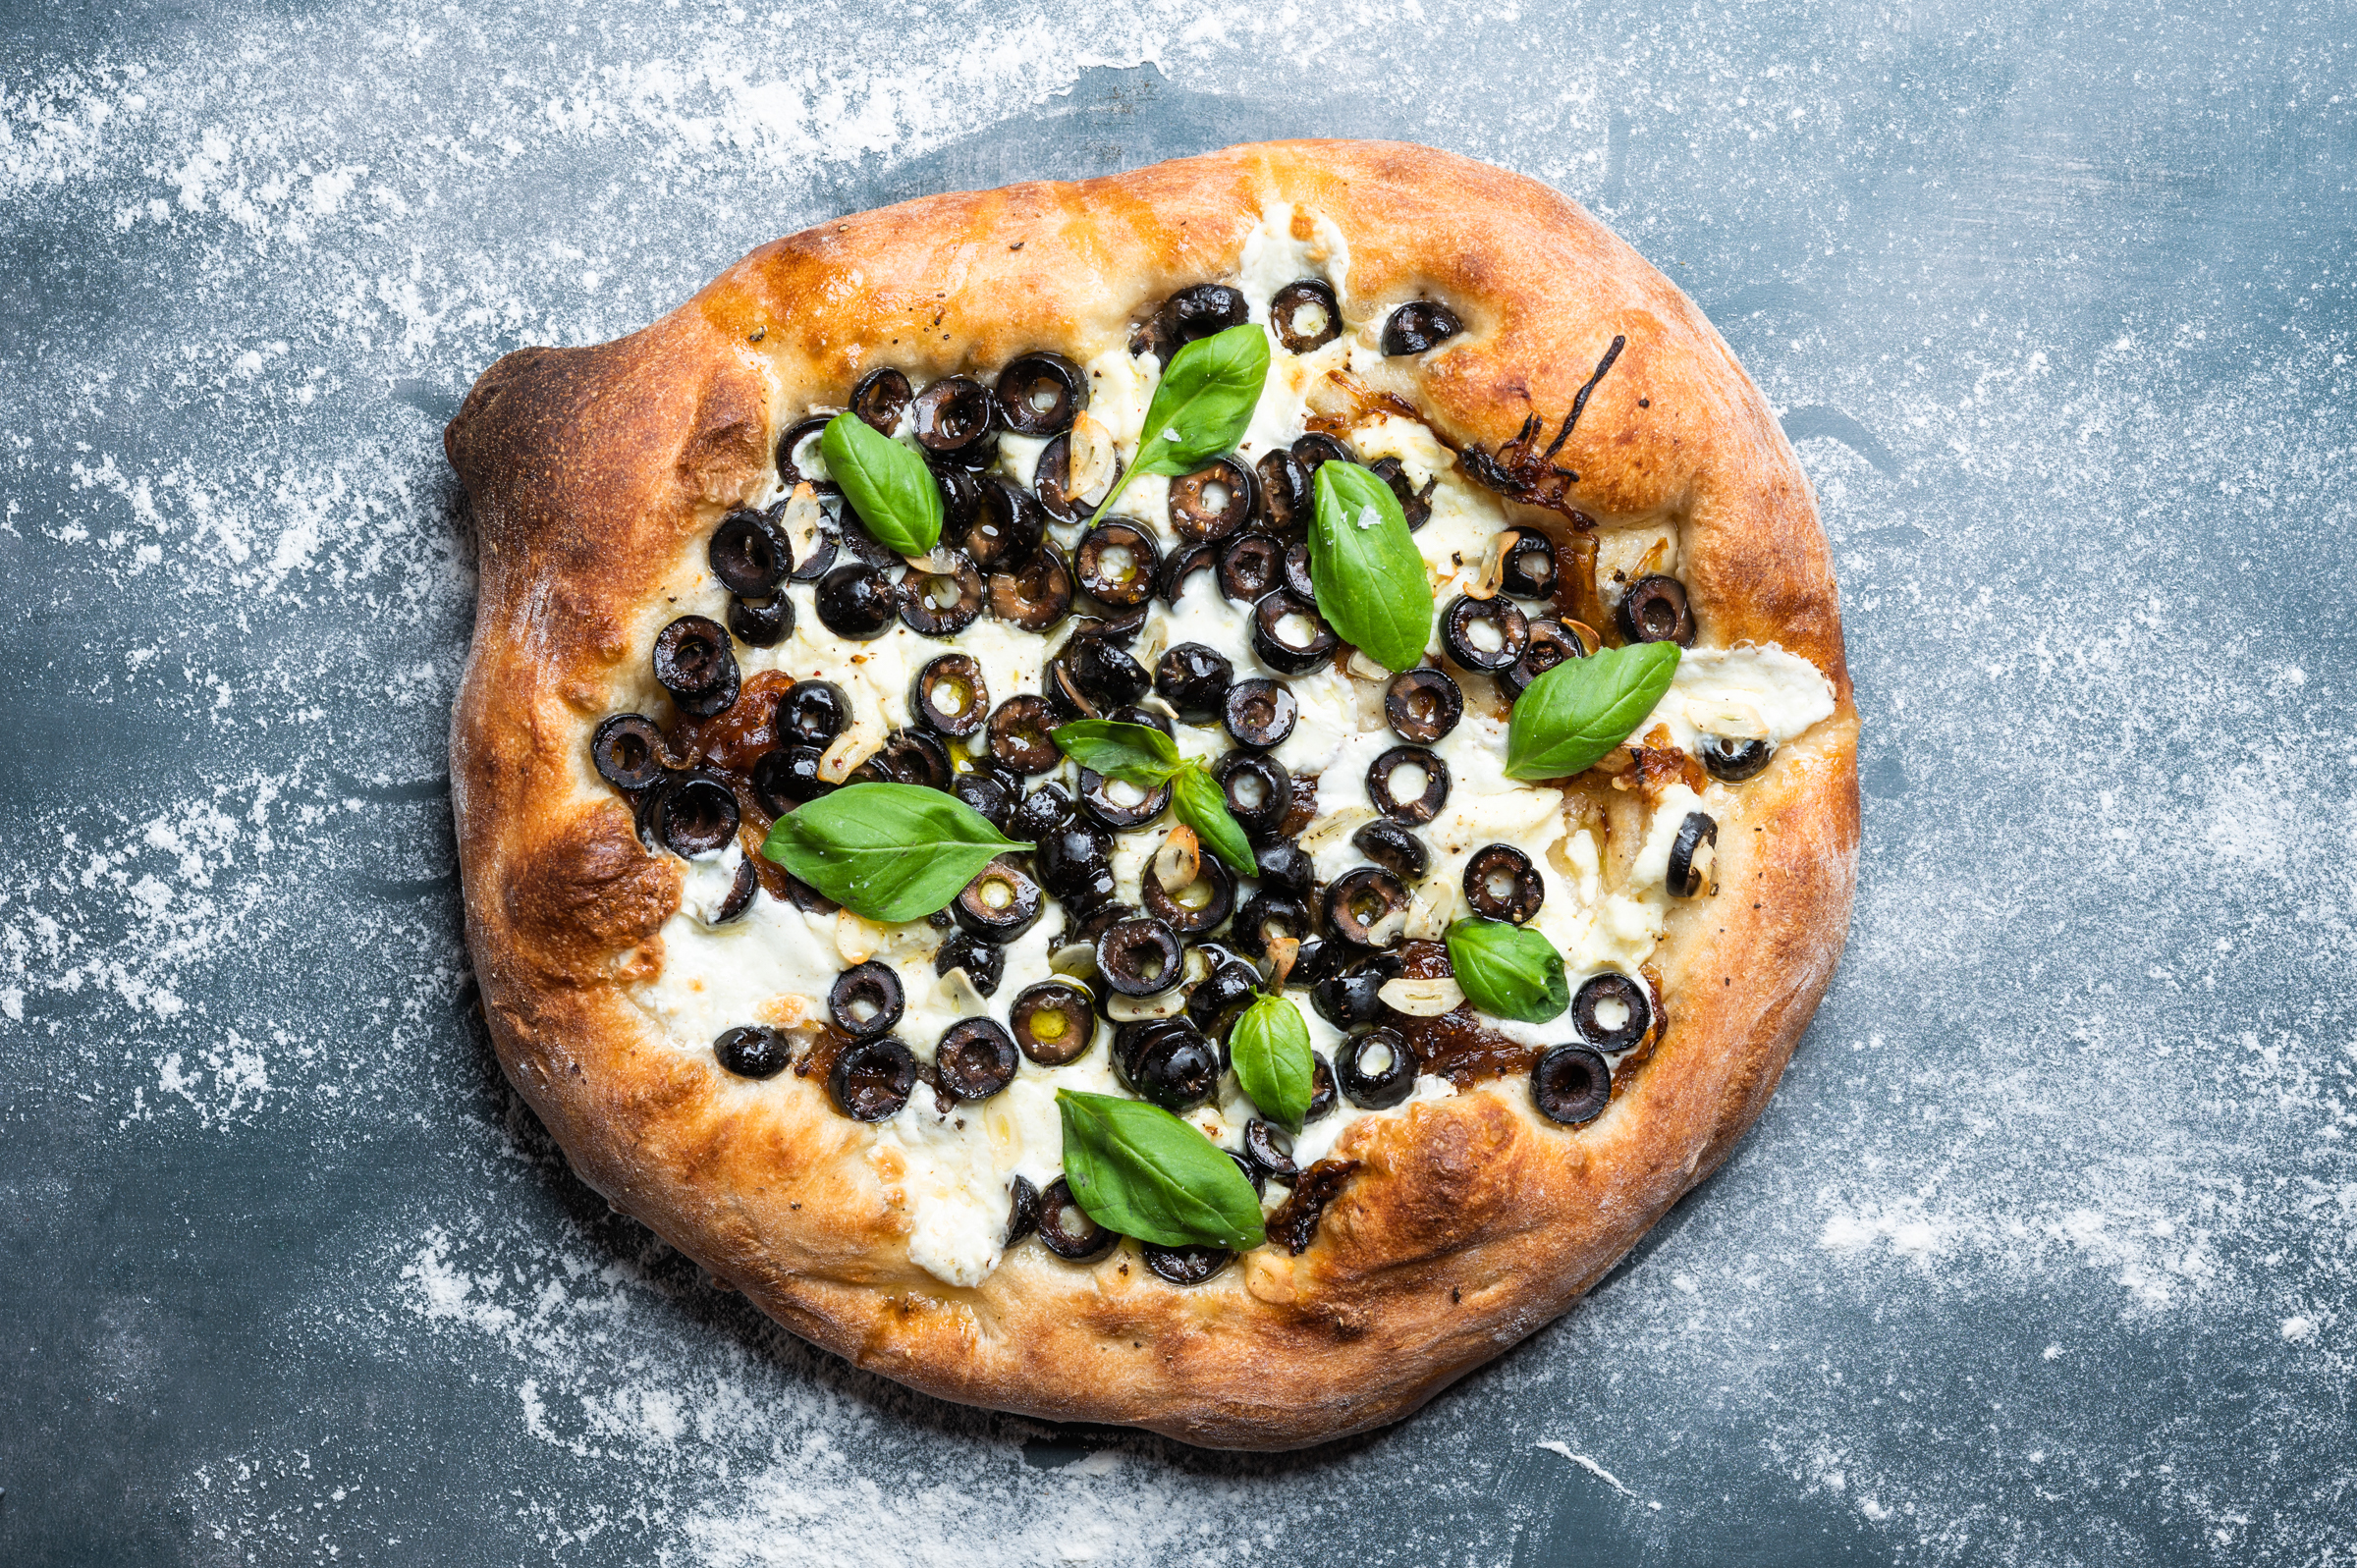 Homemade pizza with olives, cheese, and caramelized onion